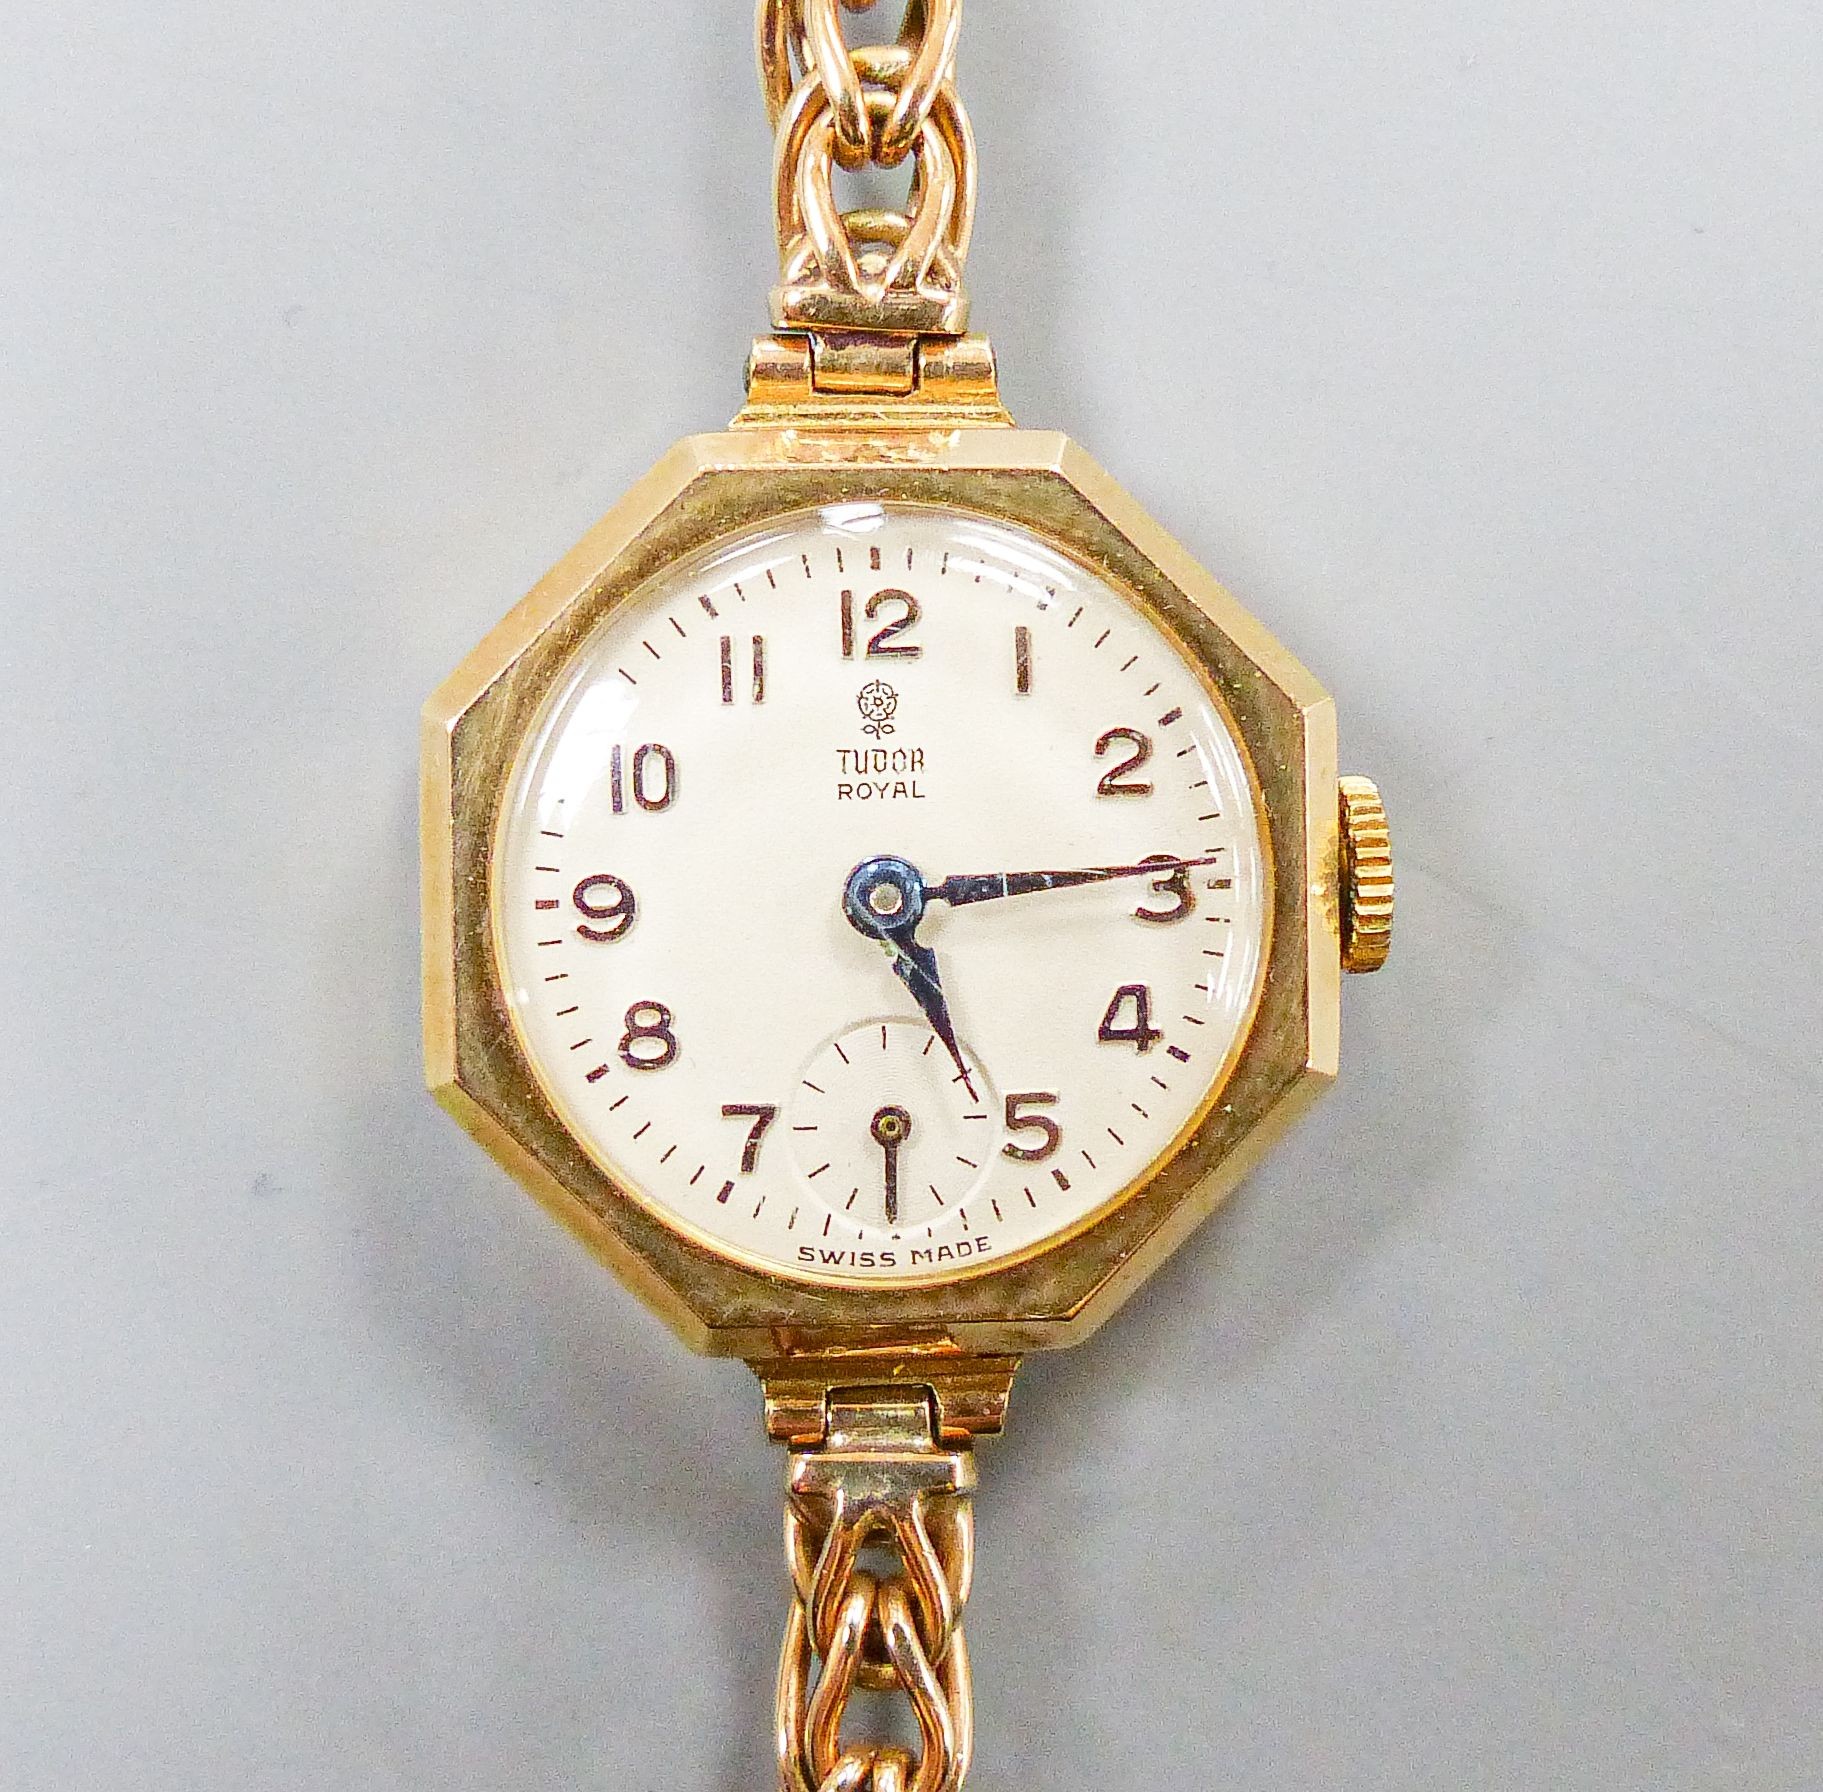 A ladys' vintage Tudor Royal 9ct gold manual wind wristwatch, having circular dial with subsidiary seconds dial in octagonal case, on a 9ct gold flexible link bracelet with safety clasp, in original box